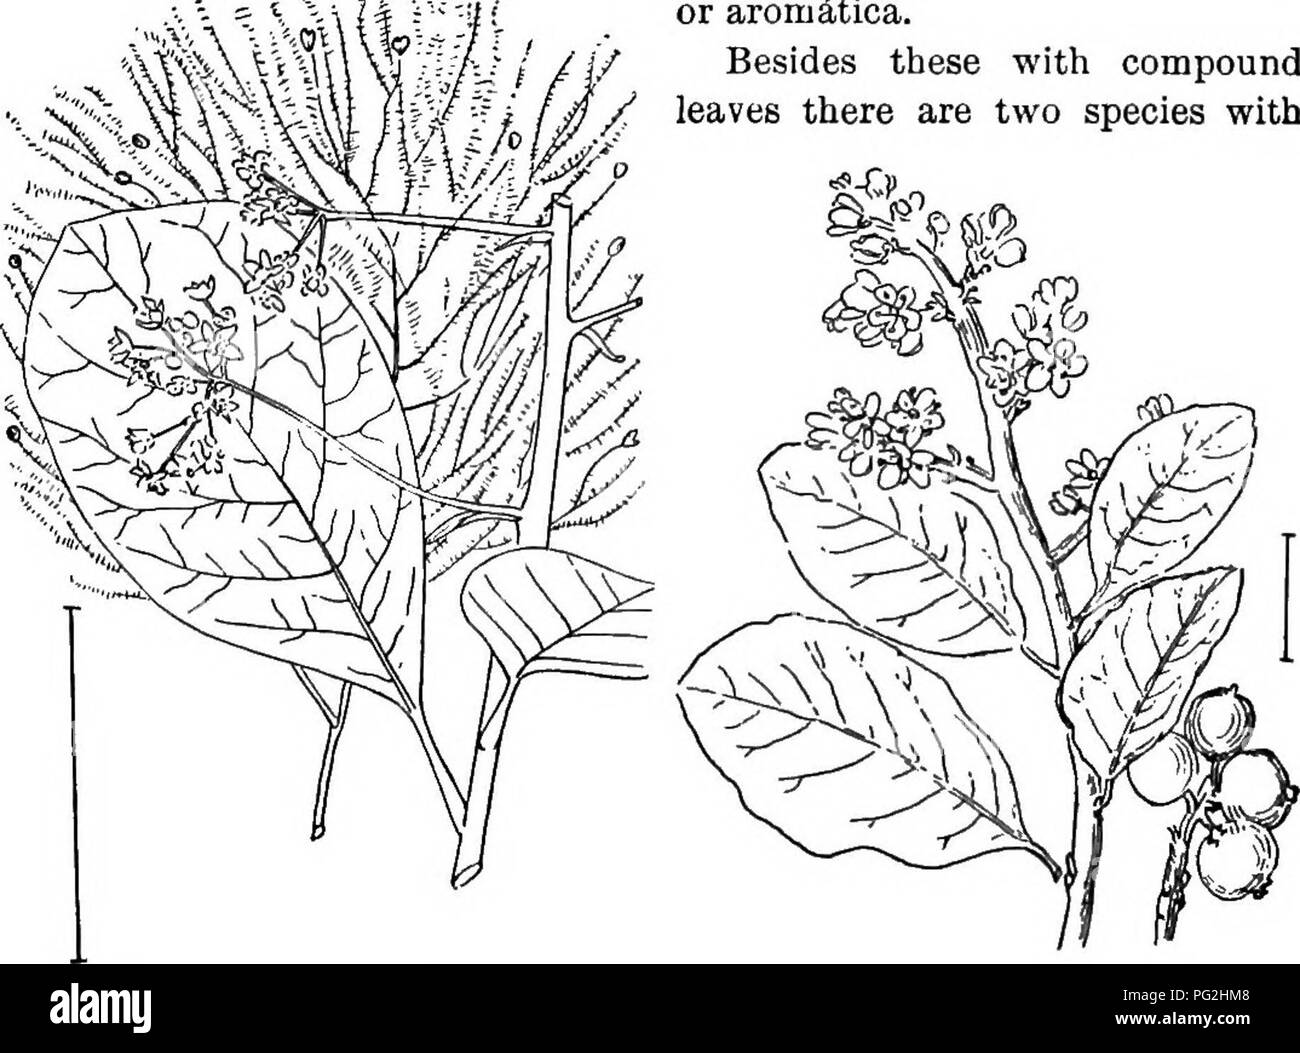 . Ornamental shrubs of the United States (hardy, cultivated). Shrubs. KEY TO THE SUMACHS 109 blades is Mountain Sumach (115) —Rhus copallina; witli finely toothed blades, Japan Sumach—Ehus semiaUta and var. Osb^ckii; with coarsely toothed blades, European or Elm-leaved Sumach (116) — Rhus Coriiiria. The smallest species with only 3 aromatic blades is the Fragrant Sumach (117) — Rhus canadensis or aromSitica. Besides these with compound leaves there are two species with. Fig. 123. — Smoke Bush. Fig. 124. — Evergreen Sumach. simple rounded leaves, sometimes placed in a separate genus, C6tinus. T Stock Photo